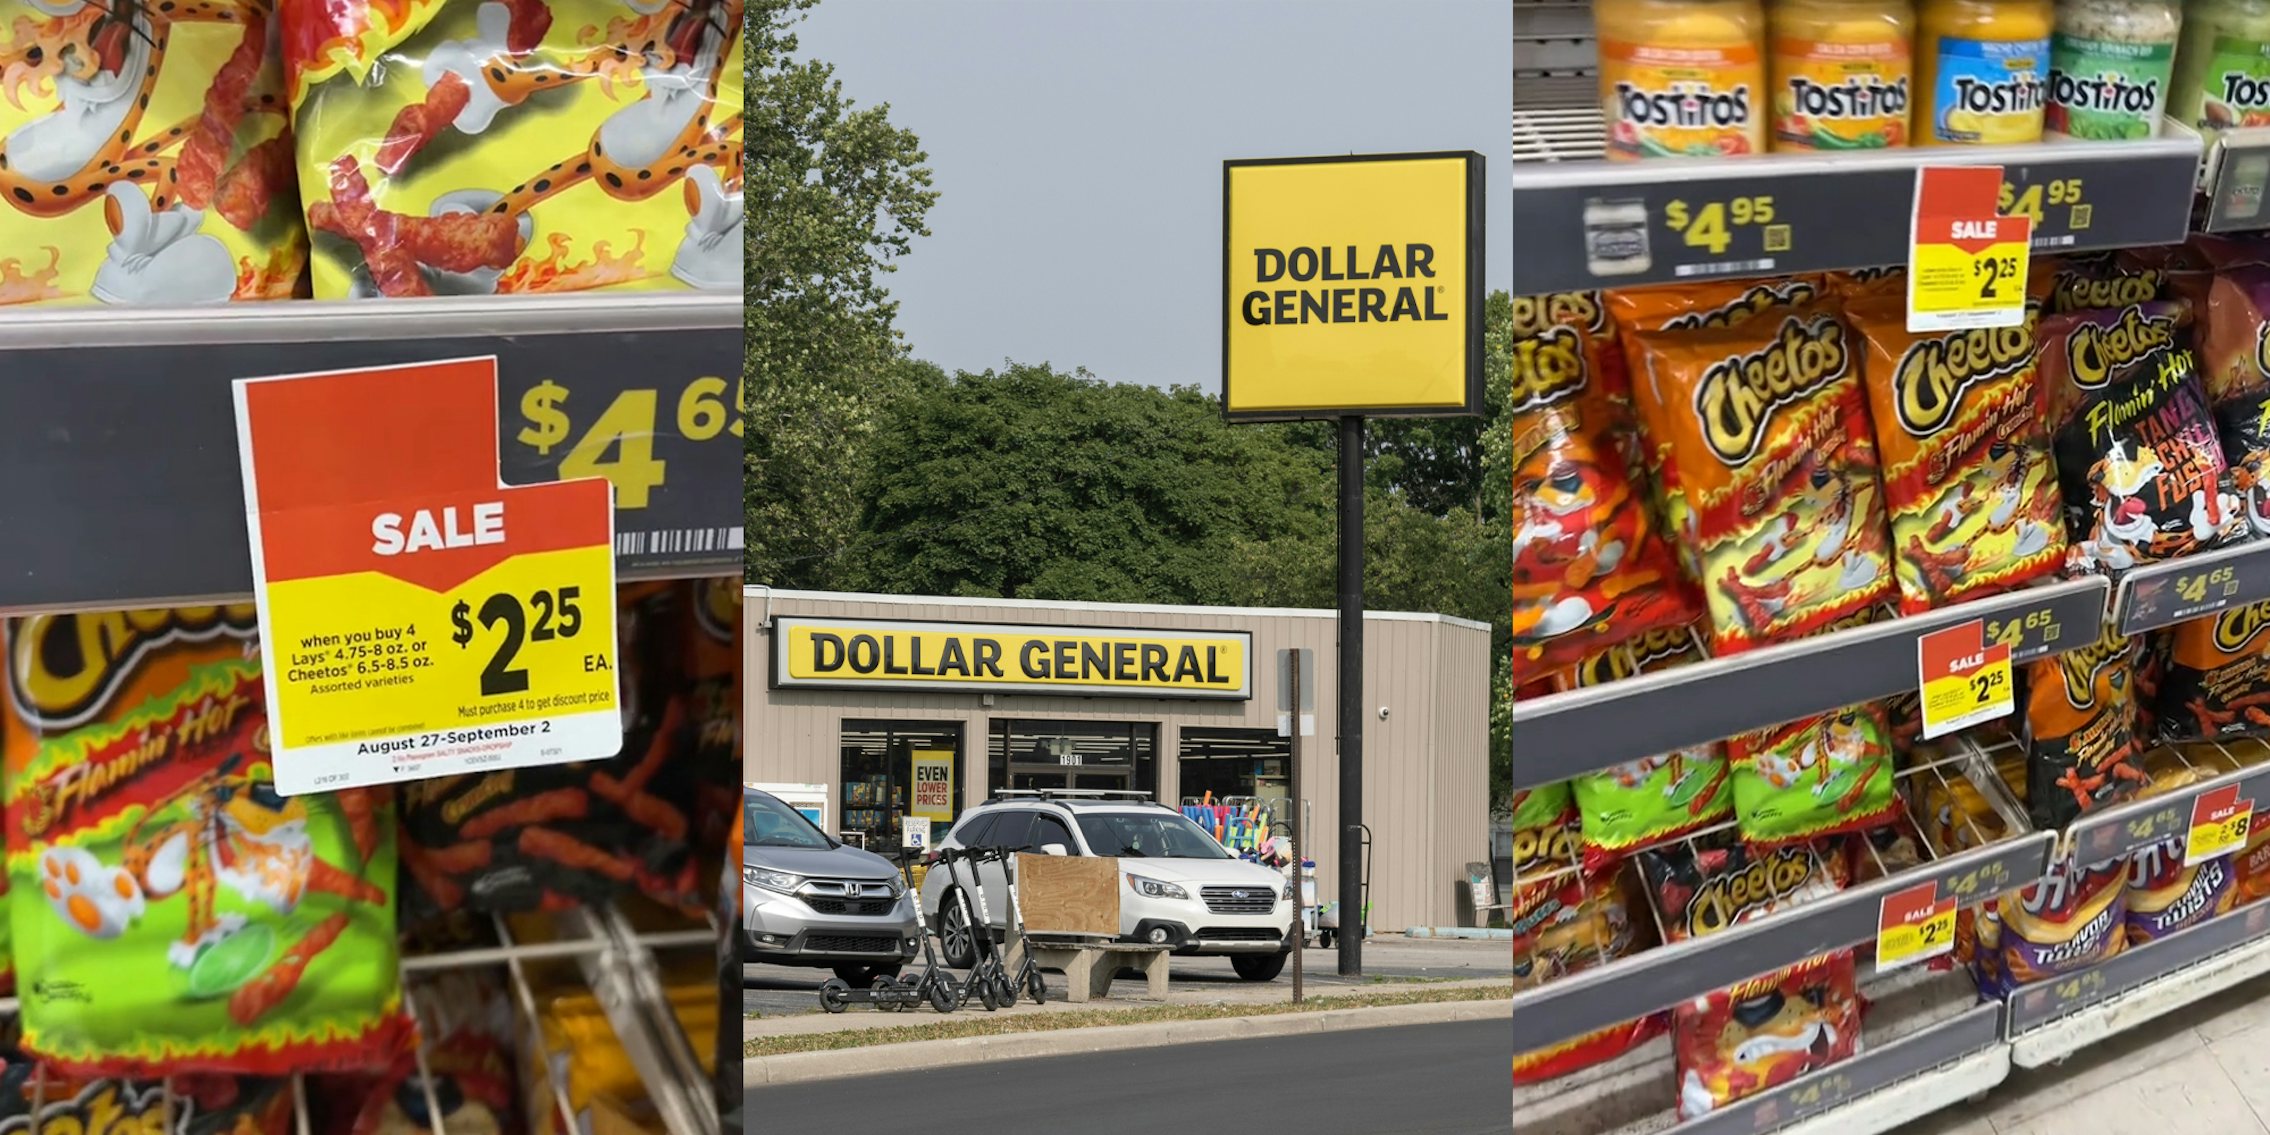 $2.25 each sale sign in chip aisle display at Dollar General (l) Dollar General building with signs (c) Dollar General Chips aisle (r)